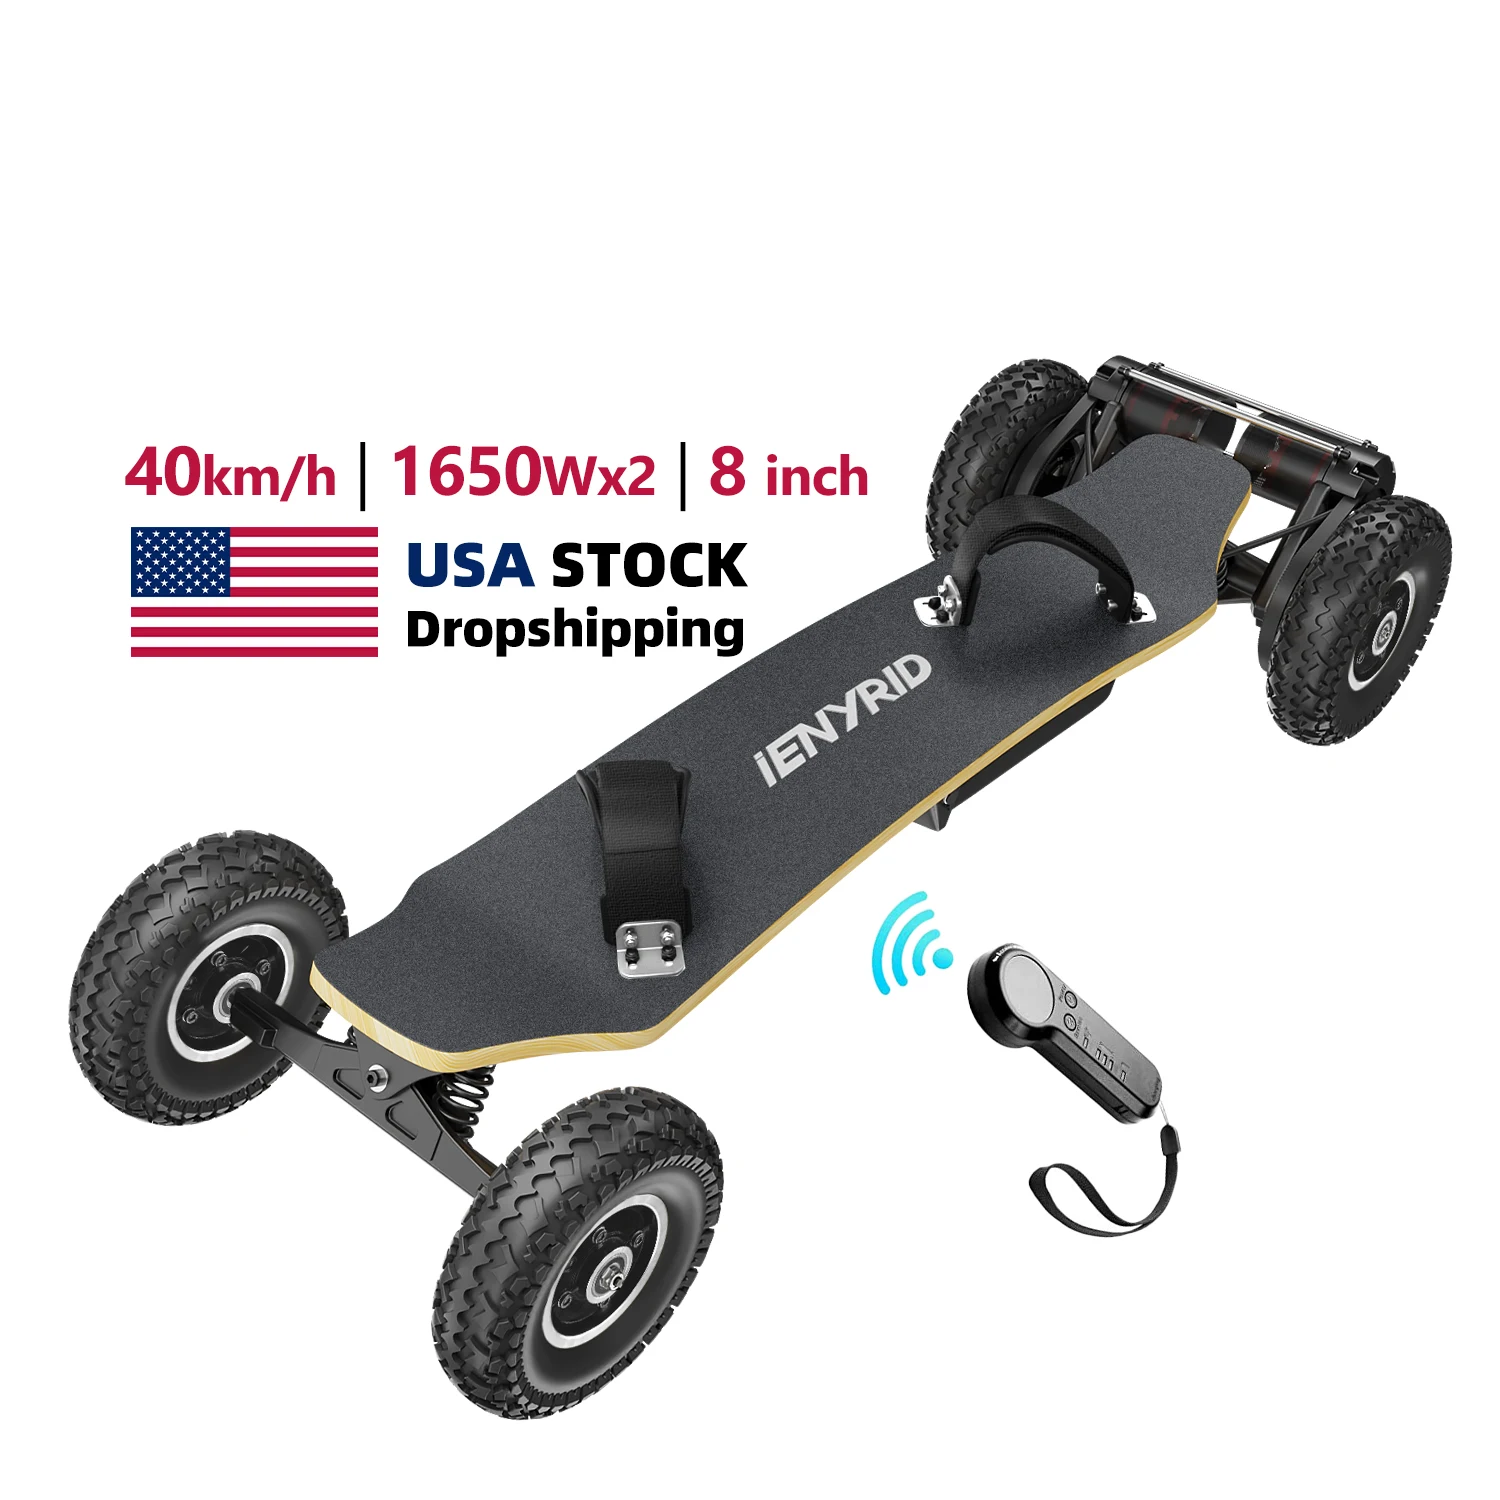 All Terrain directly Wholesale electric skate board Dual Motor Each 1650W*2 skateboard with Remote Control USA warehouse